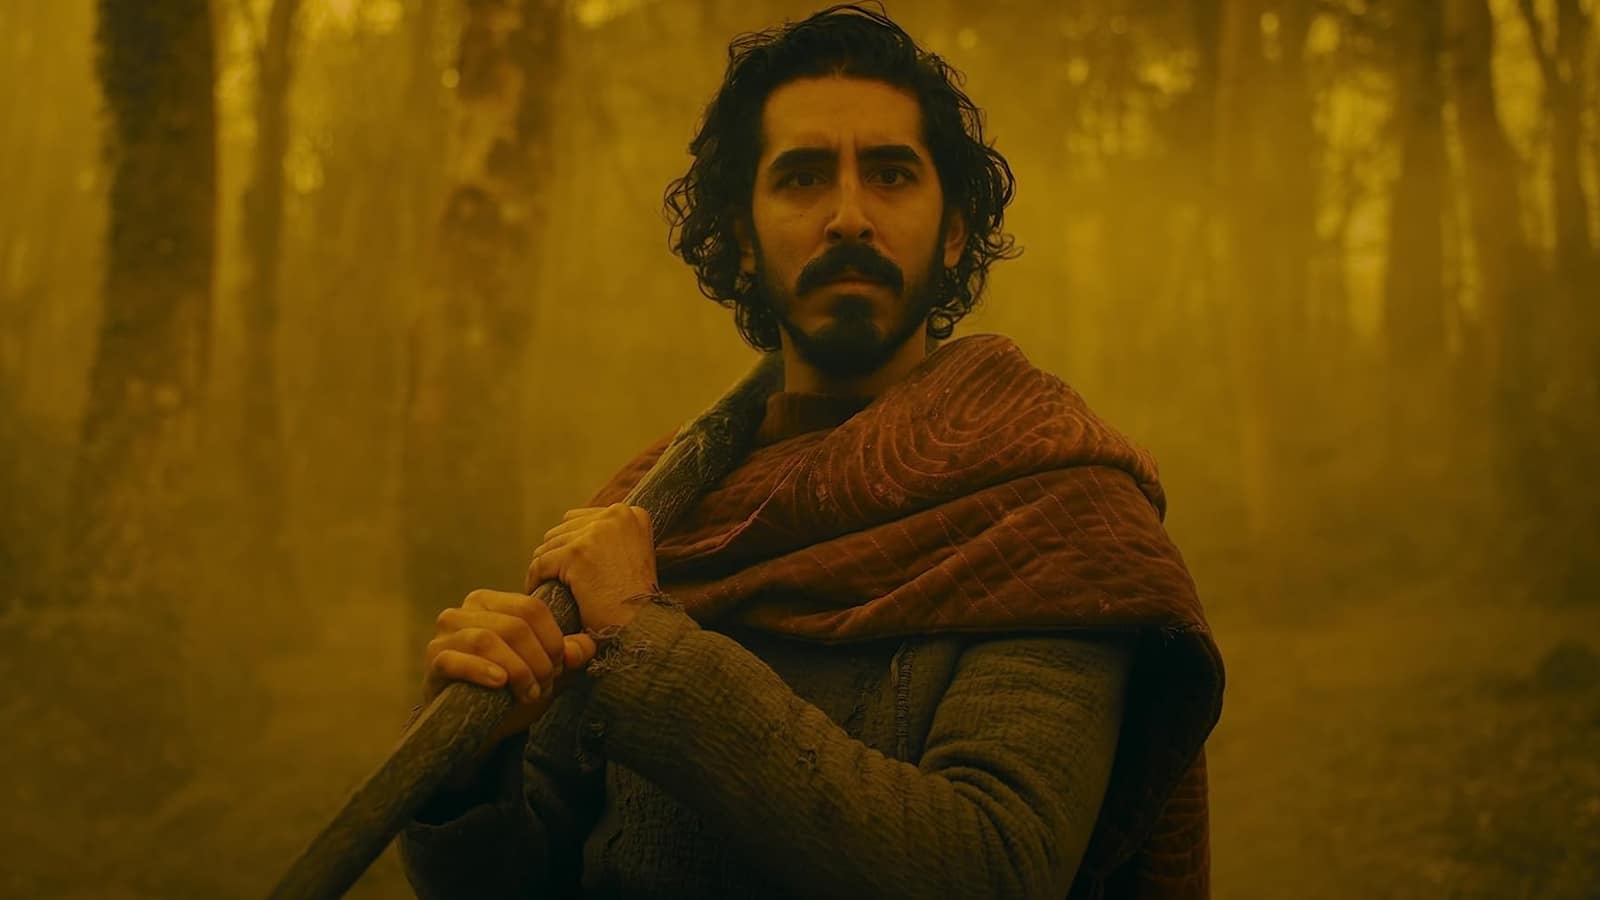 <p>Looking to fulfill his end of a bargain, King Arthur’s nephew, Sir Gawain (Dev Patel), travels across medieval England to meet the mythical Green Knight (Ralph Ineson).</p><p>Along with <em>The Northman, The Green Knight</em> is among the best medieval films of recent memory. A luminous and psychedelic take on the Arthurian legend of Gawain and his duel with the eponymous Green Knight, it examines some fascinating aspects of Gawain’s story, including masculinity, nobility, destiny, and bravery.</p>